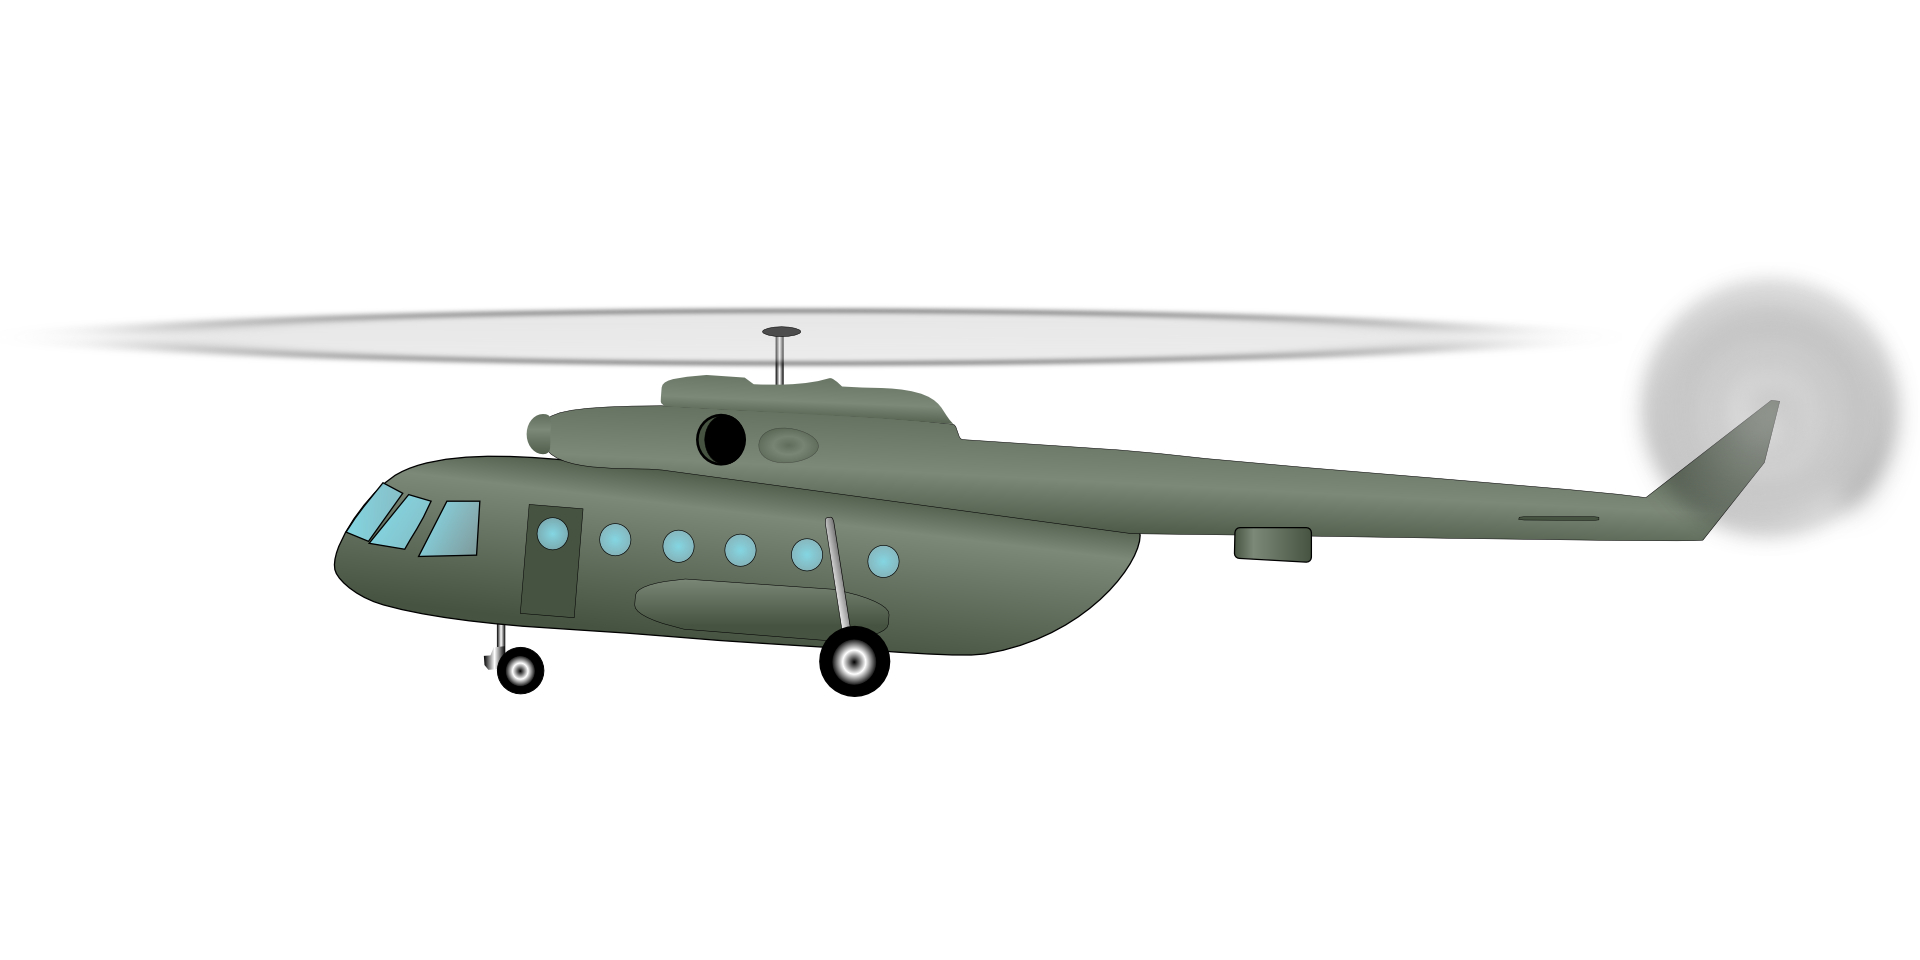 Military aircraft,helicopter,cartoon airplane vector